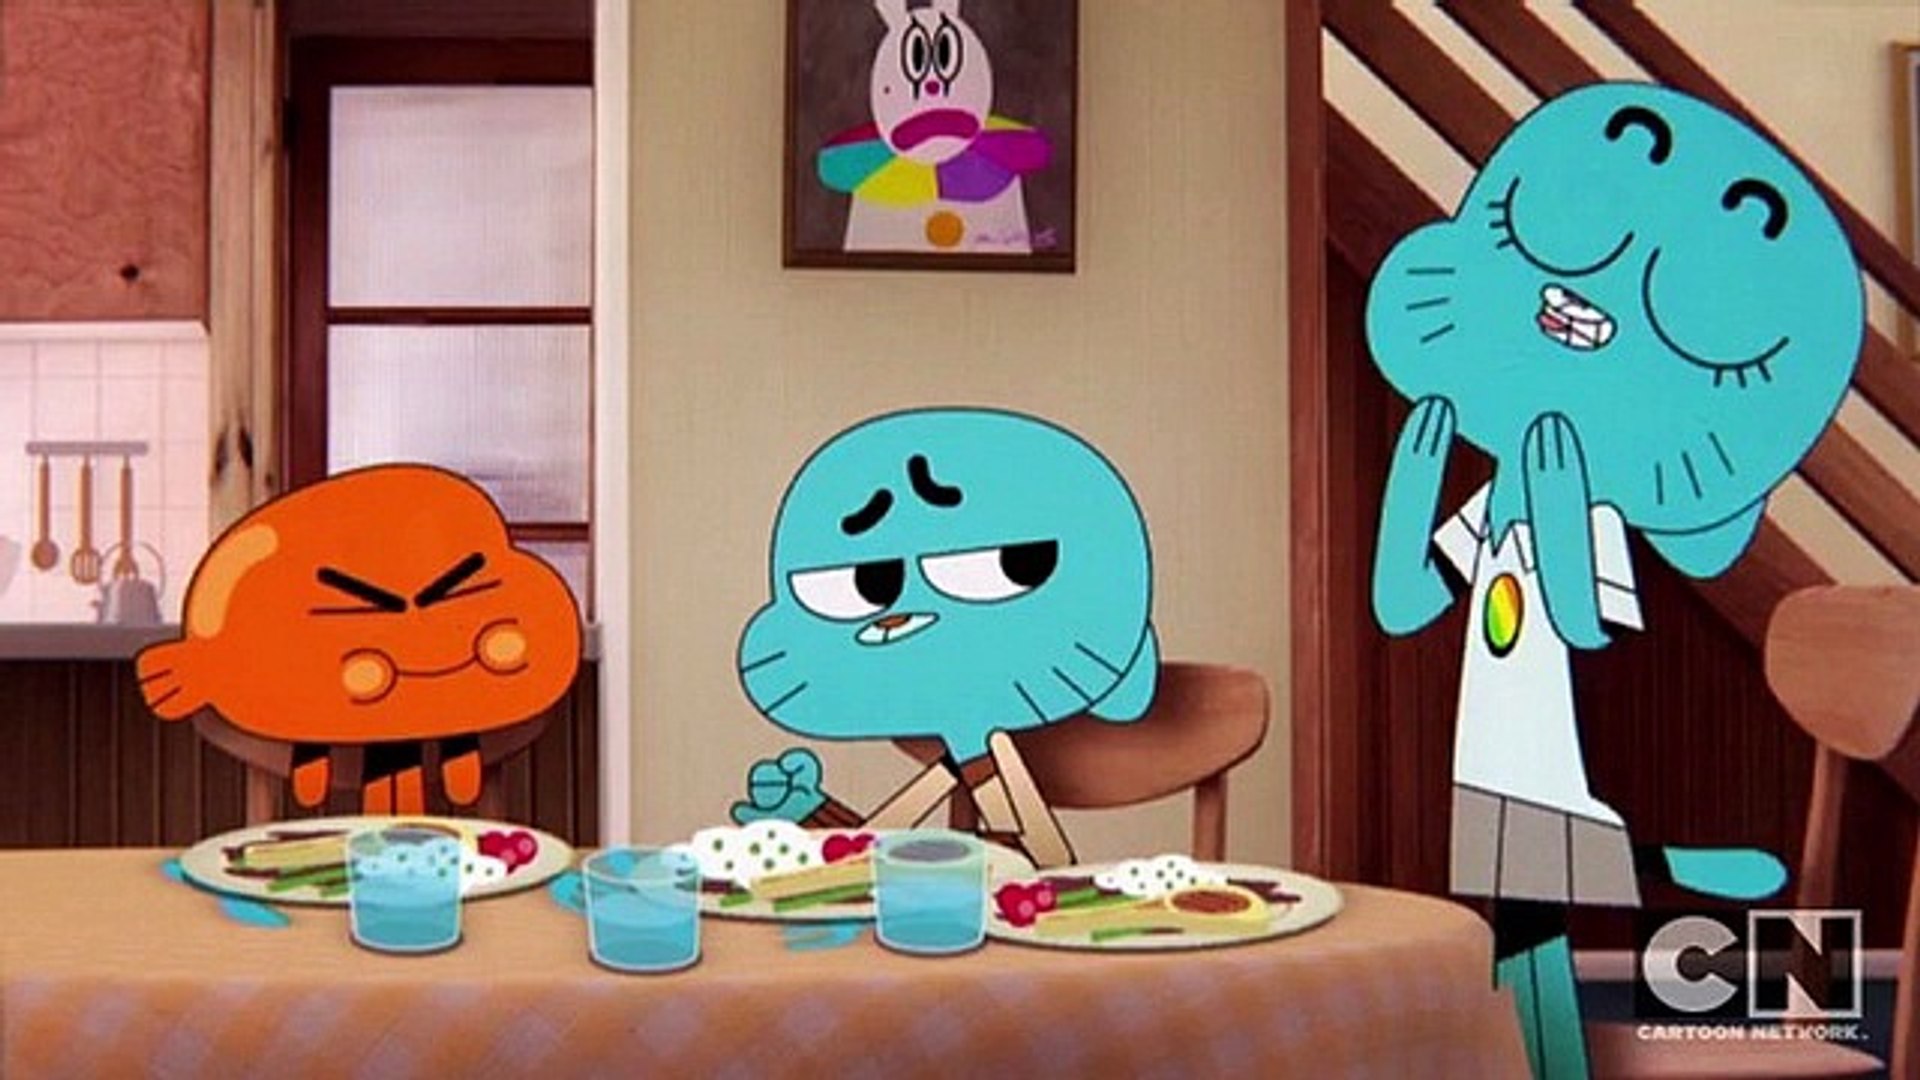 The Amazing World Of Gumball - Fellowship Of The Things [ Full Gameplay ]- Gumball  Games - video Dailymotion